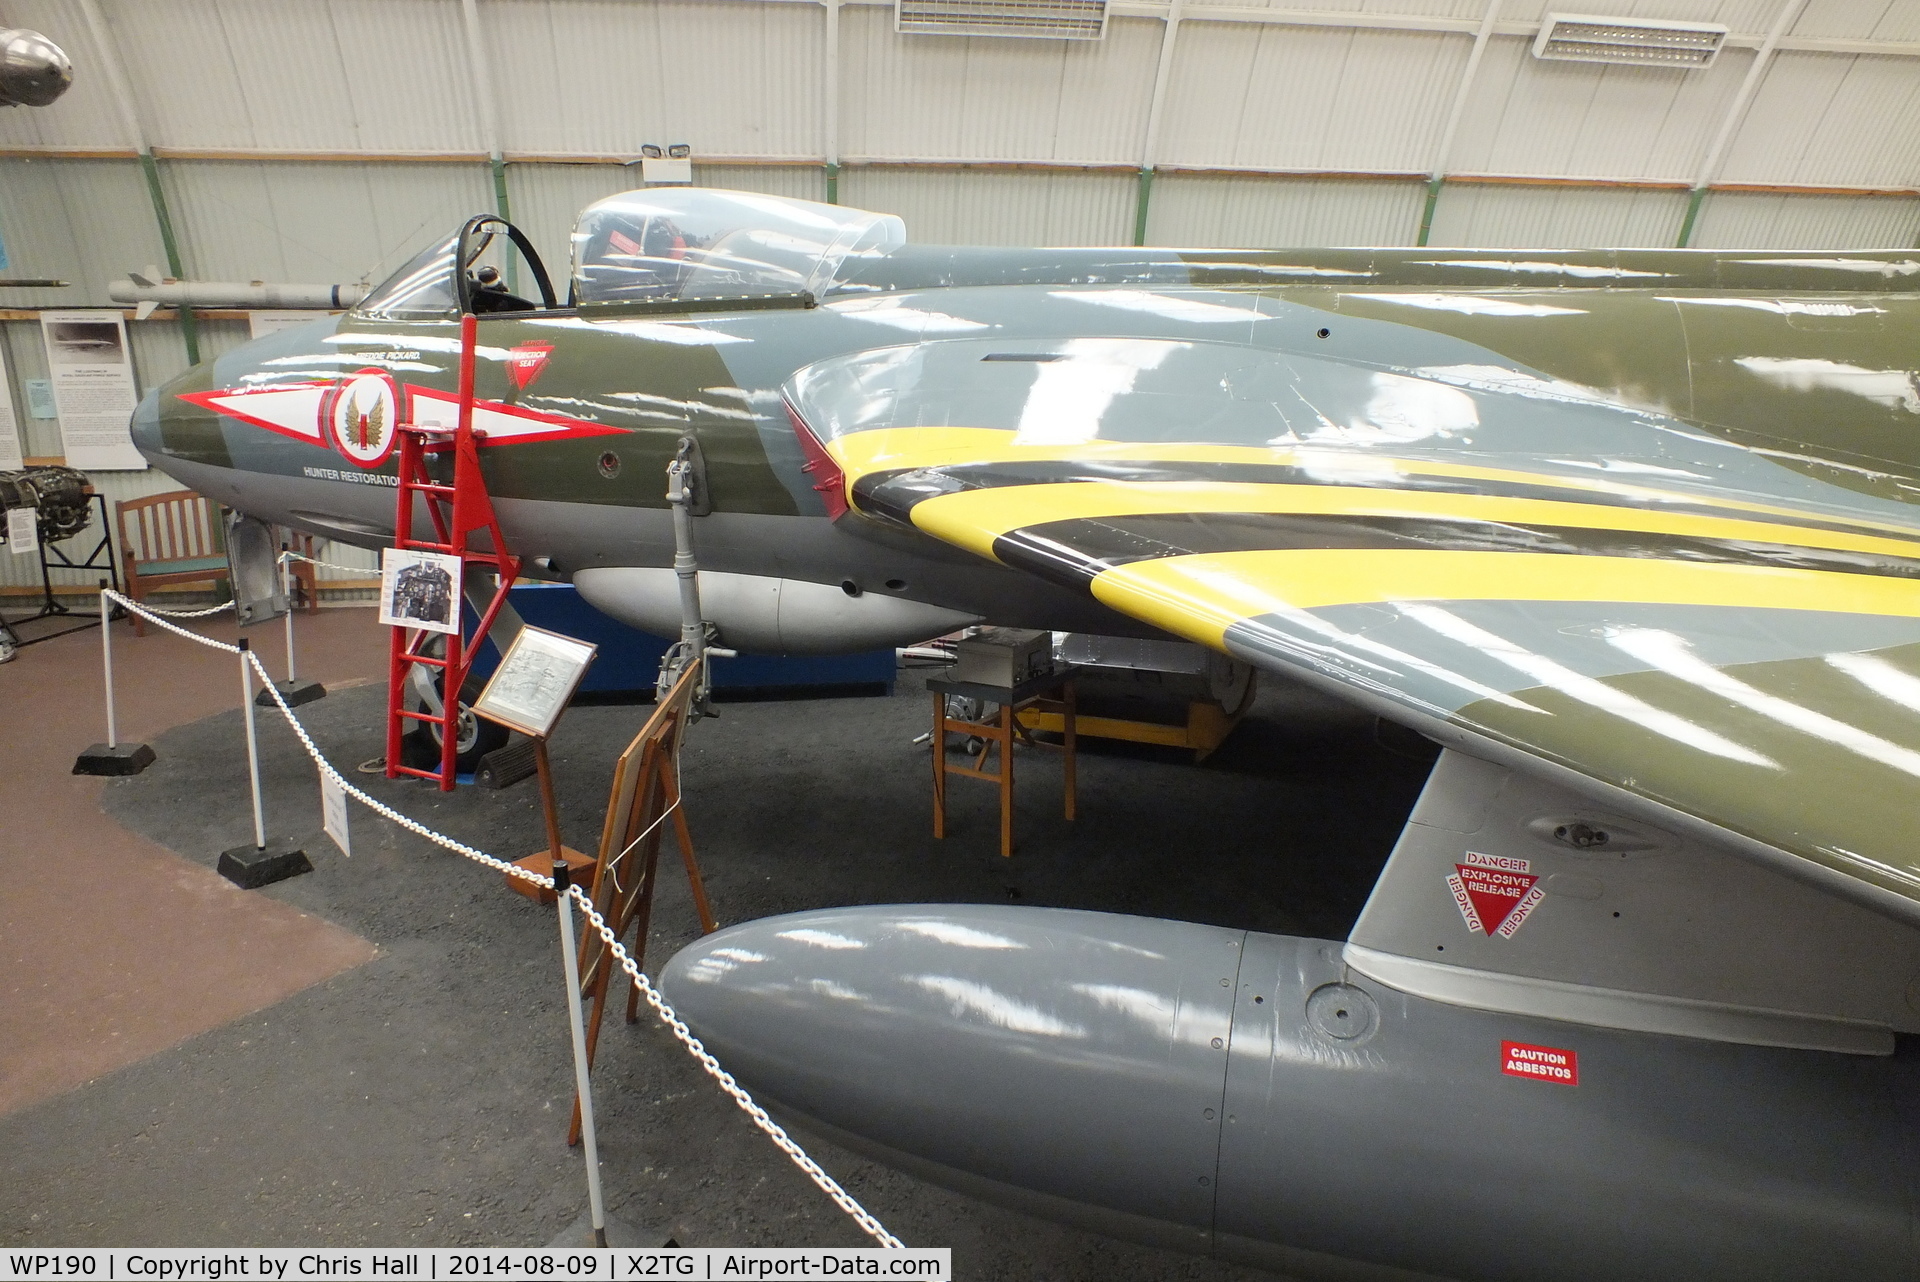 WP190, 1955 Hawker Hunter F.5 C/N S4/U/3041, at the Tangmere Military Aviation Museum